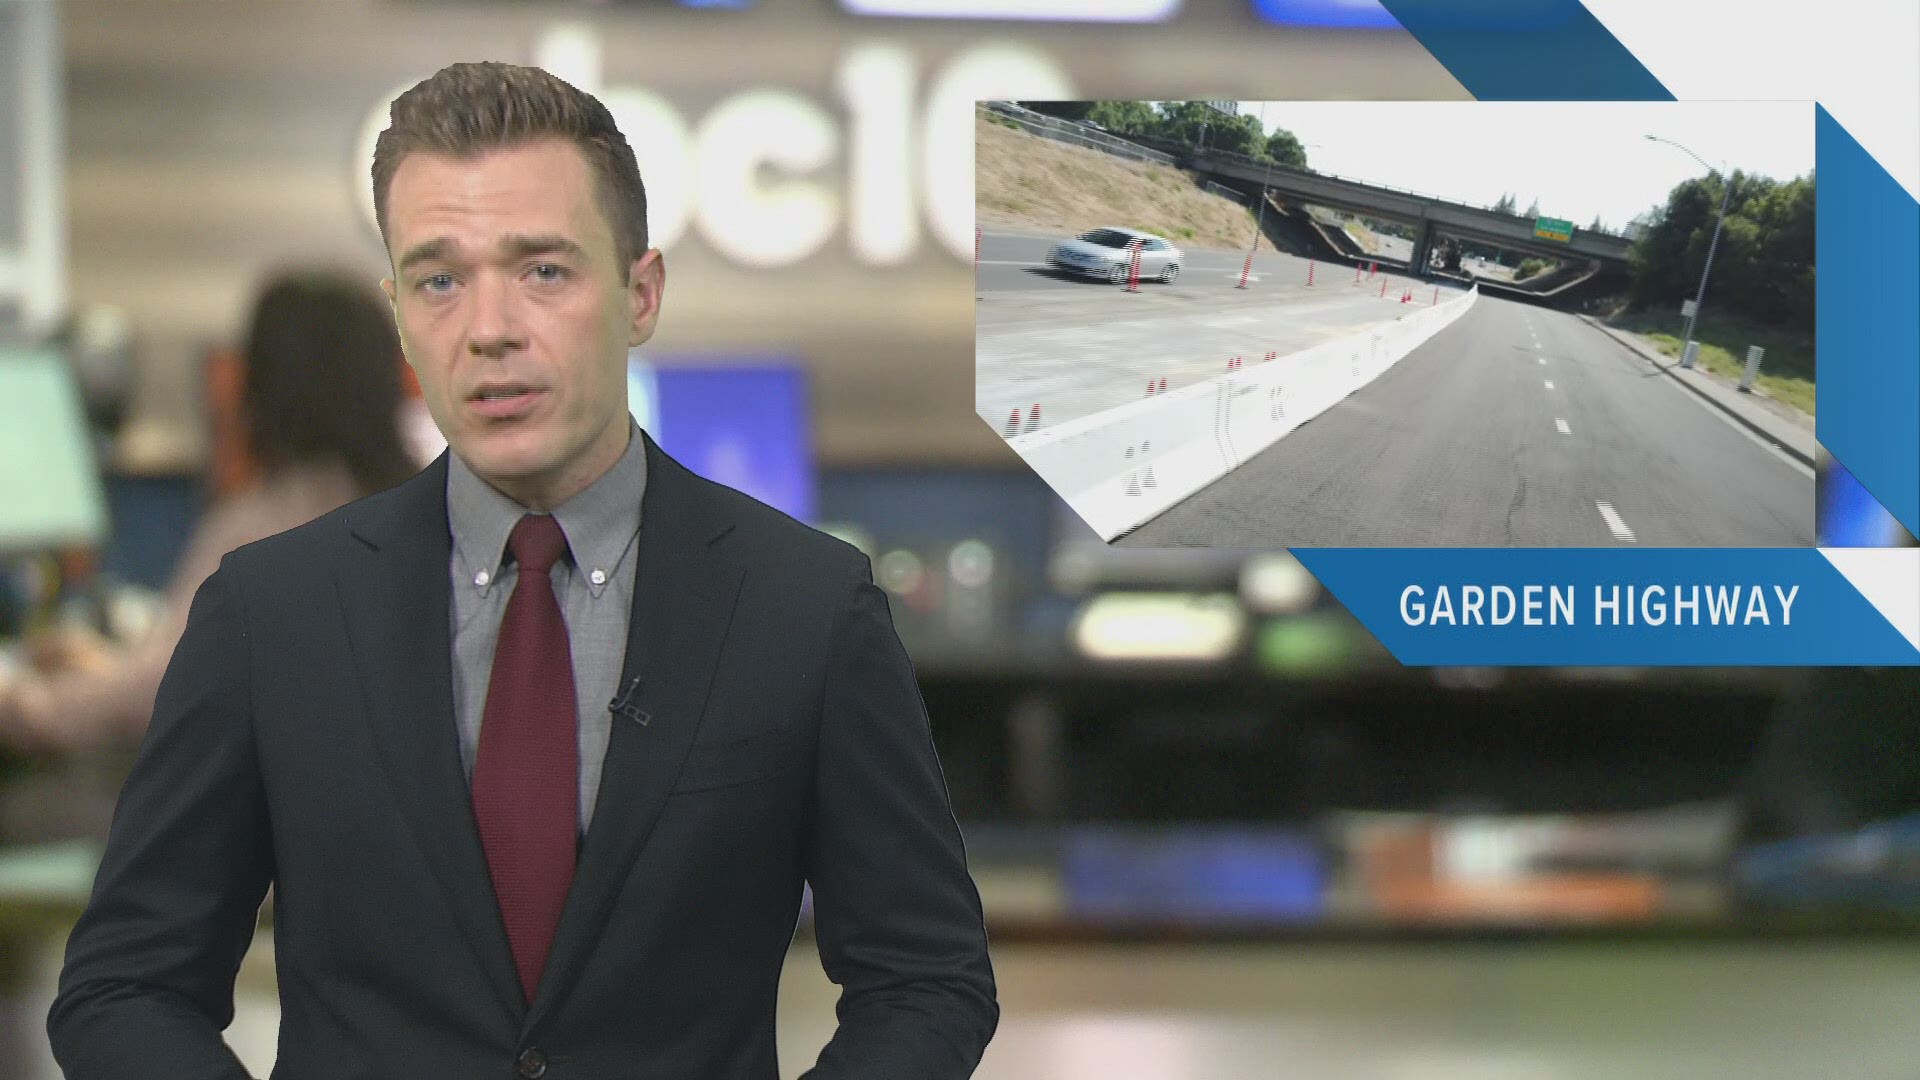 Evening Headlines: July 8, 2019 | Catch in-depth reporting on #LateNewsTonight at 11 p.m. | The latest Sacramento news is always at www.abc10.com